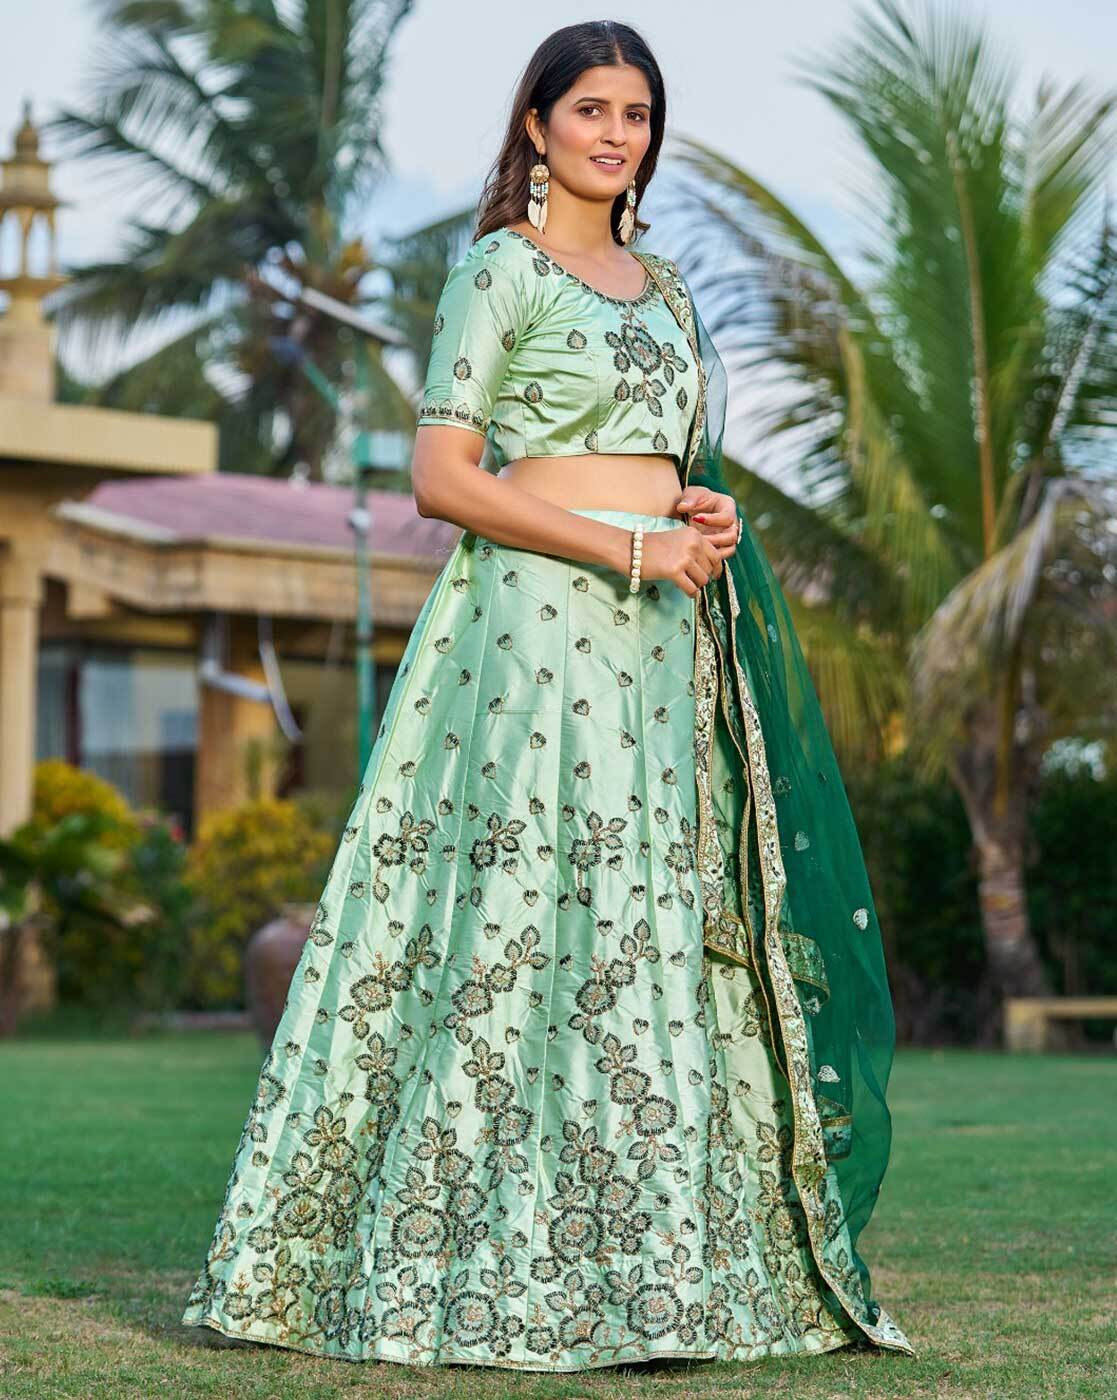 Best Indian Bridesmaid Outfit Ideas? Lehenga Under 2500 - More Than Pants